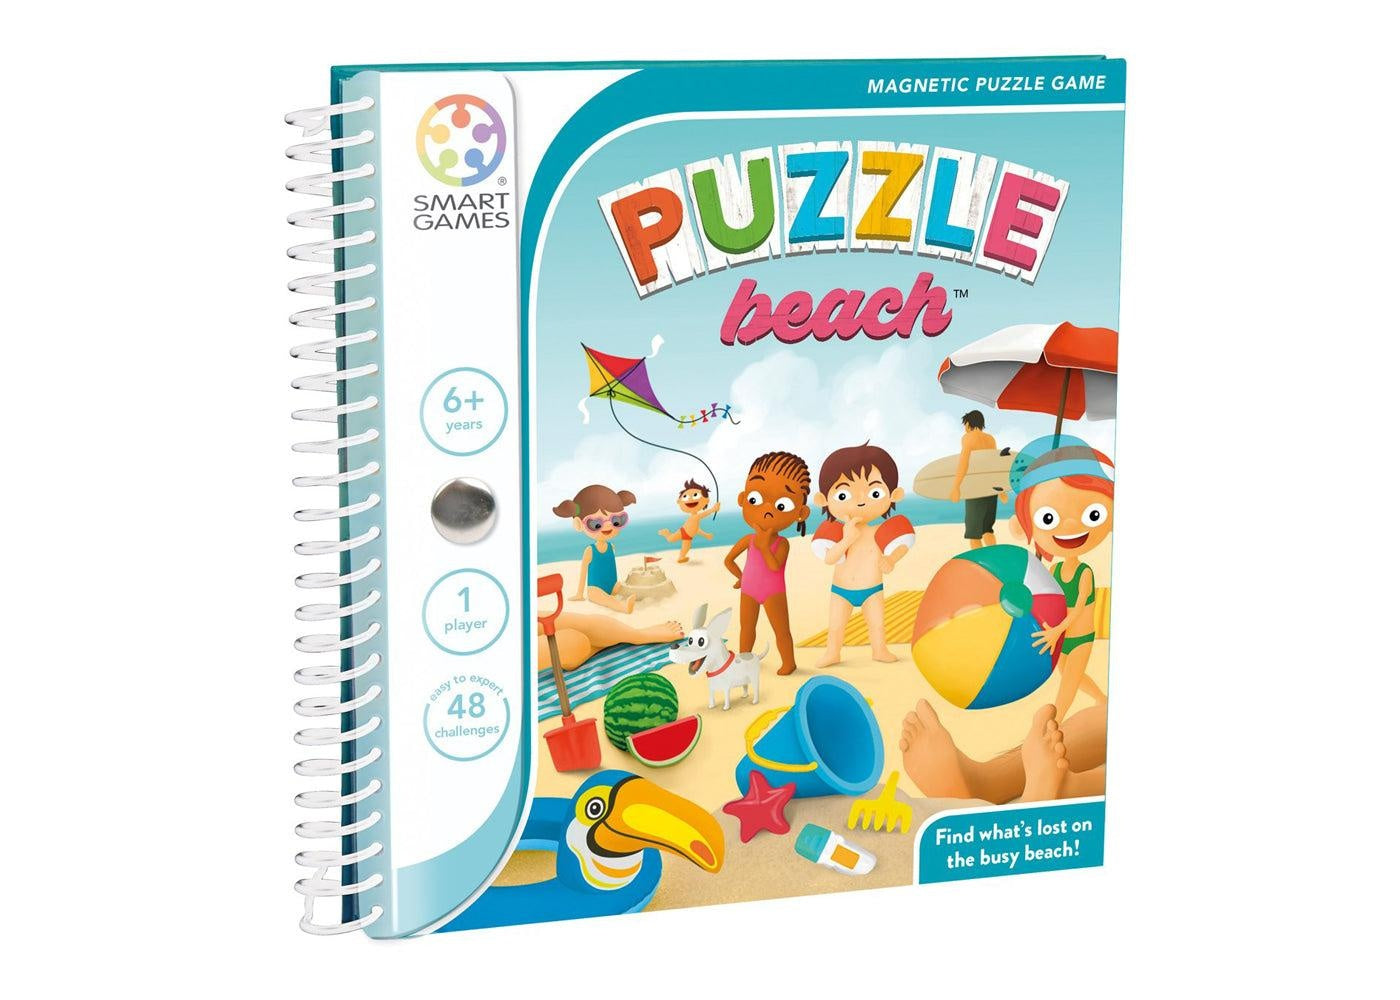 Puzzle Beach (Travel - Magnetic Games)